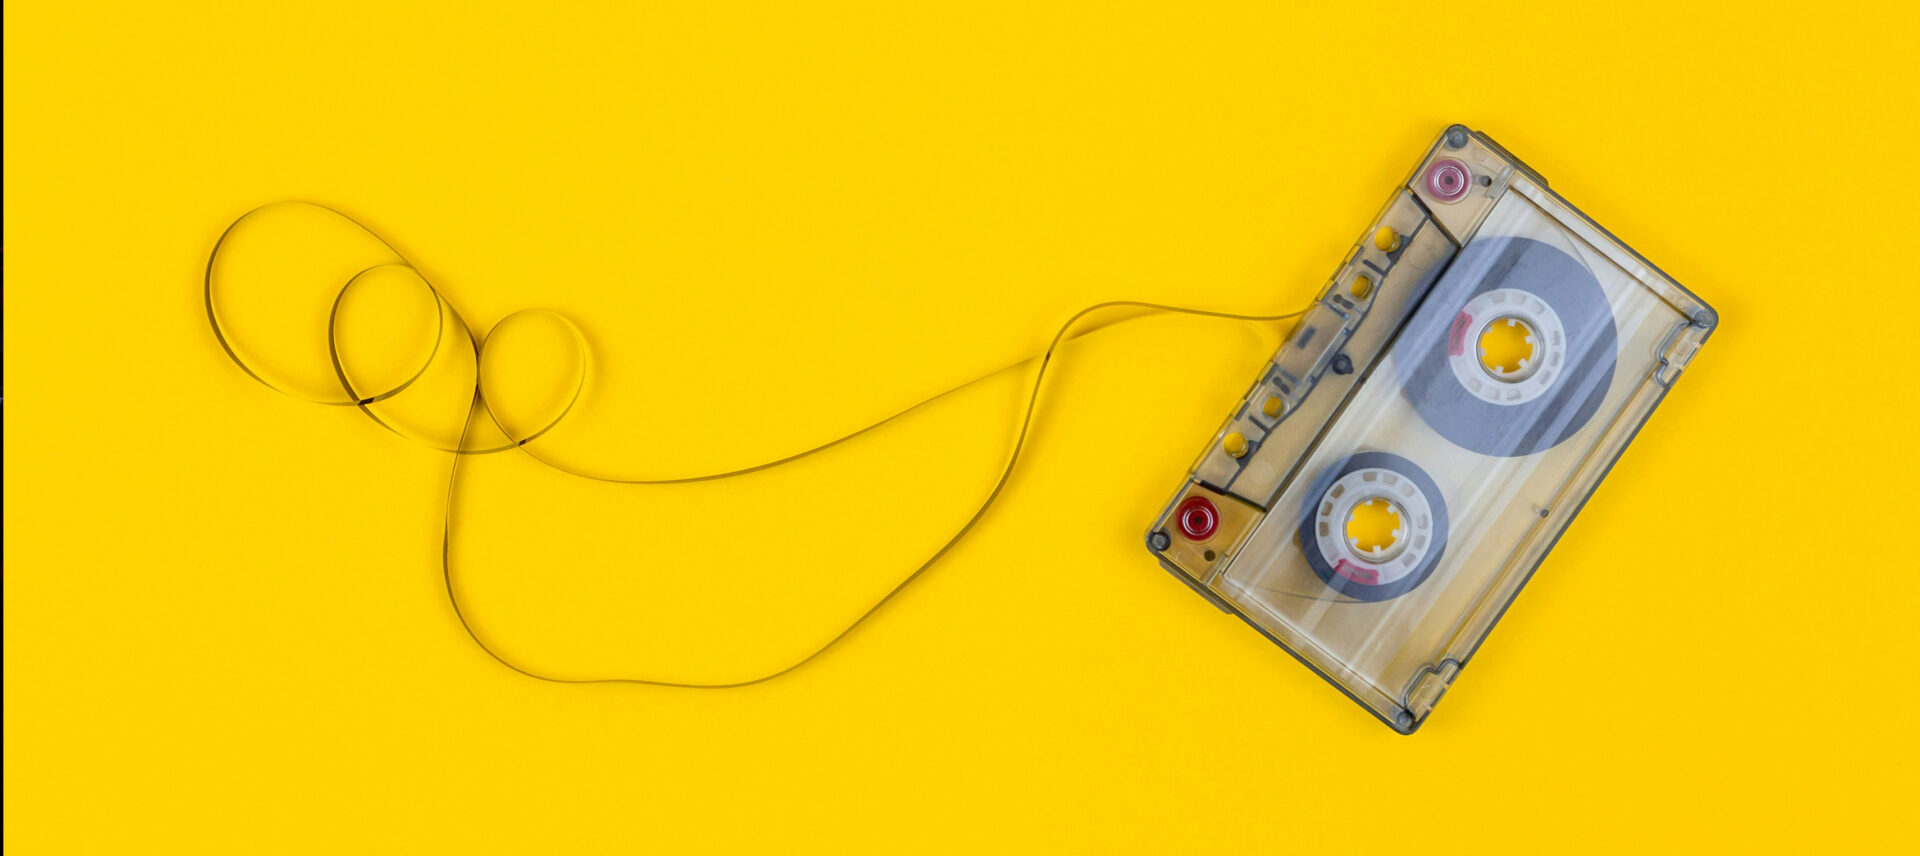 Cassette tape pulled out of case on yellow background